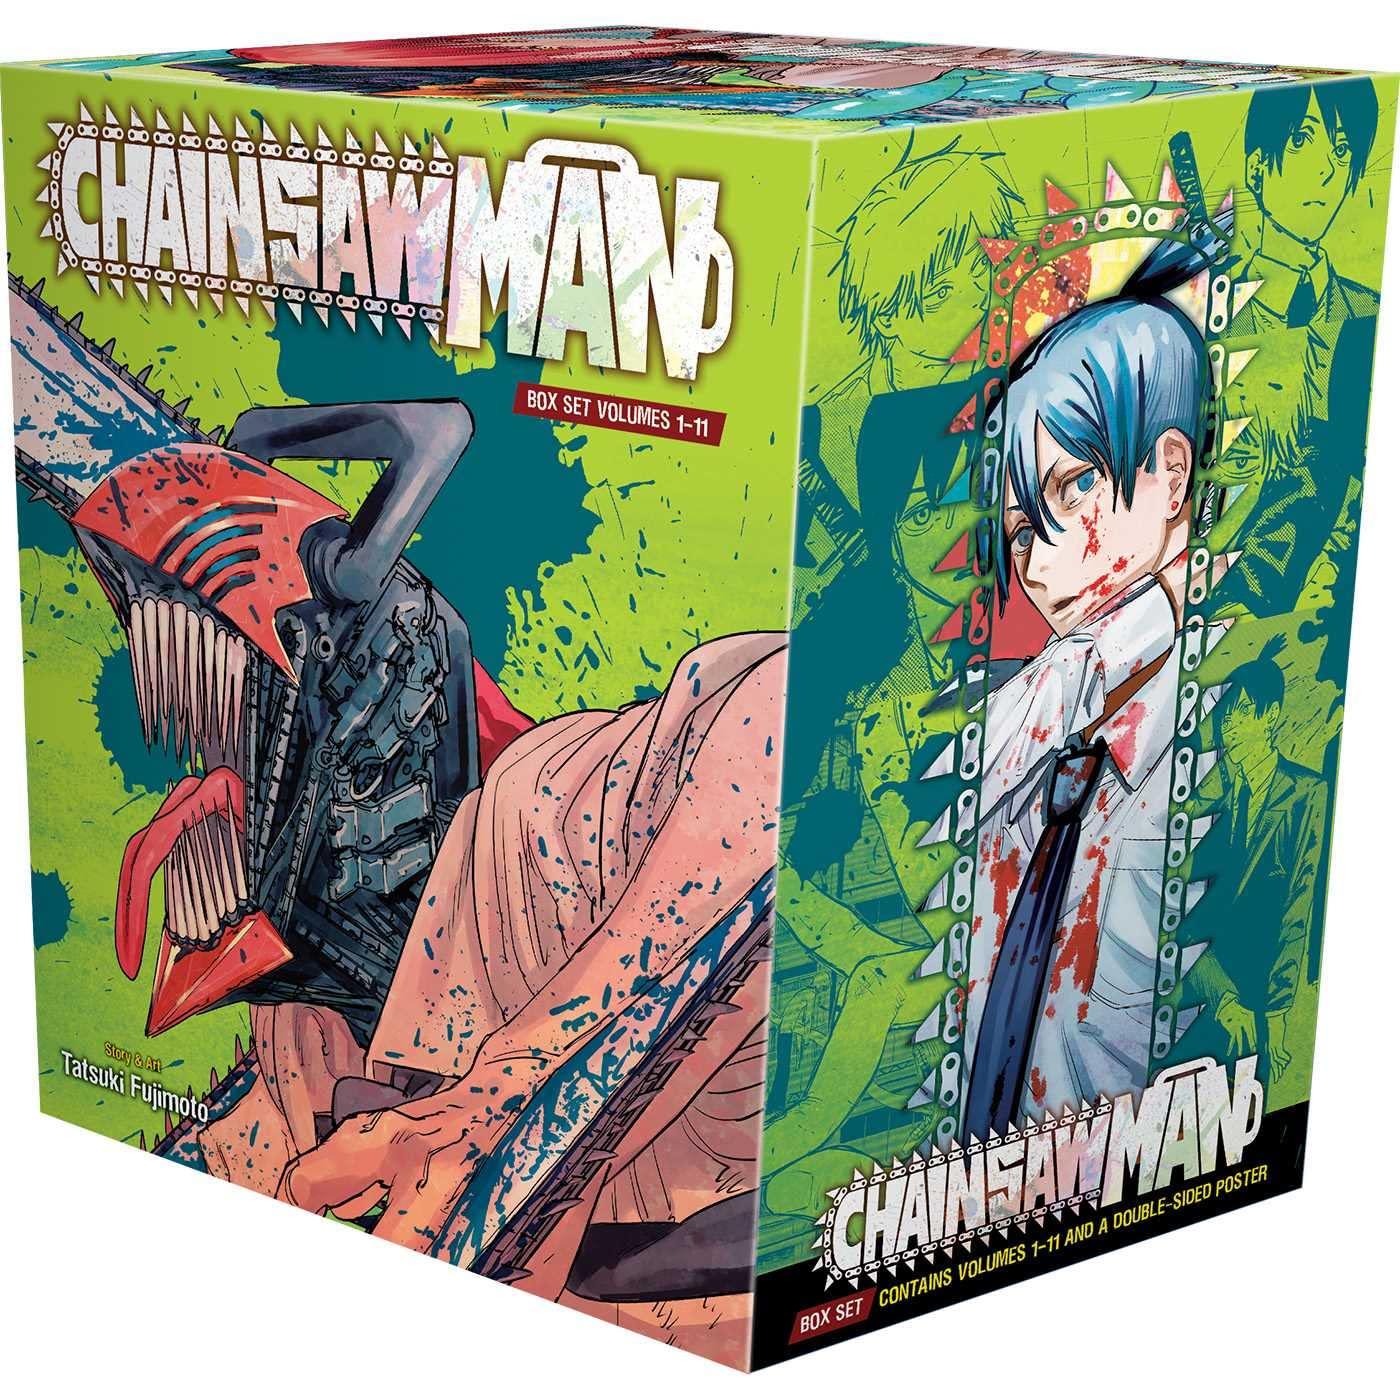 Has Chainsaw Man Been Canceled?